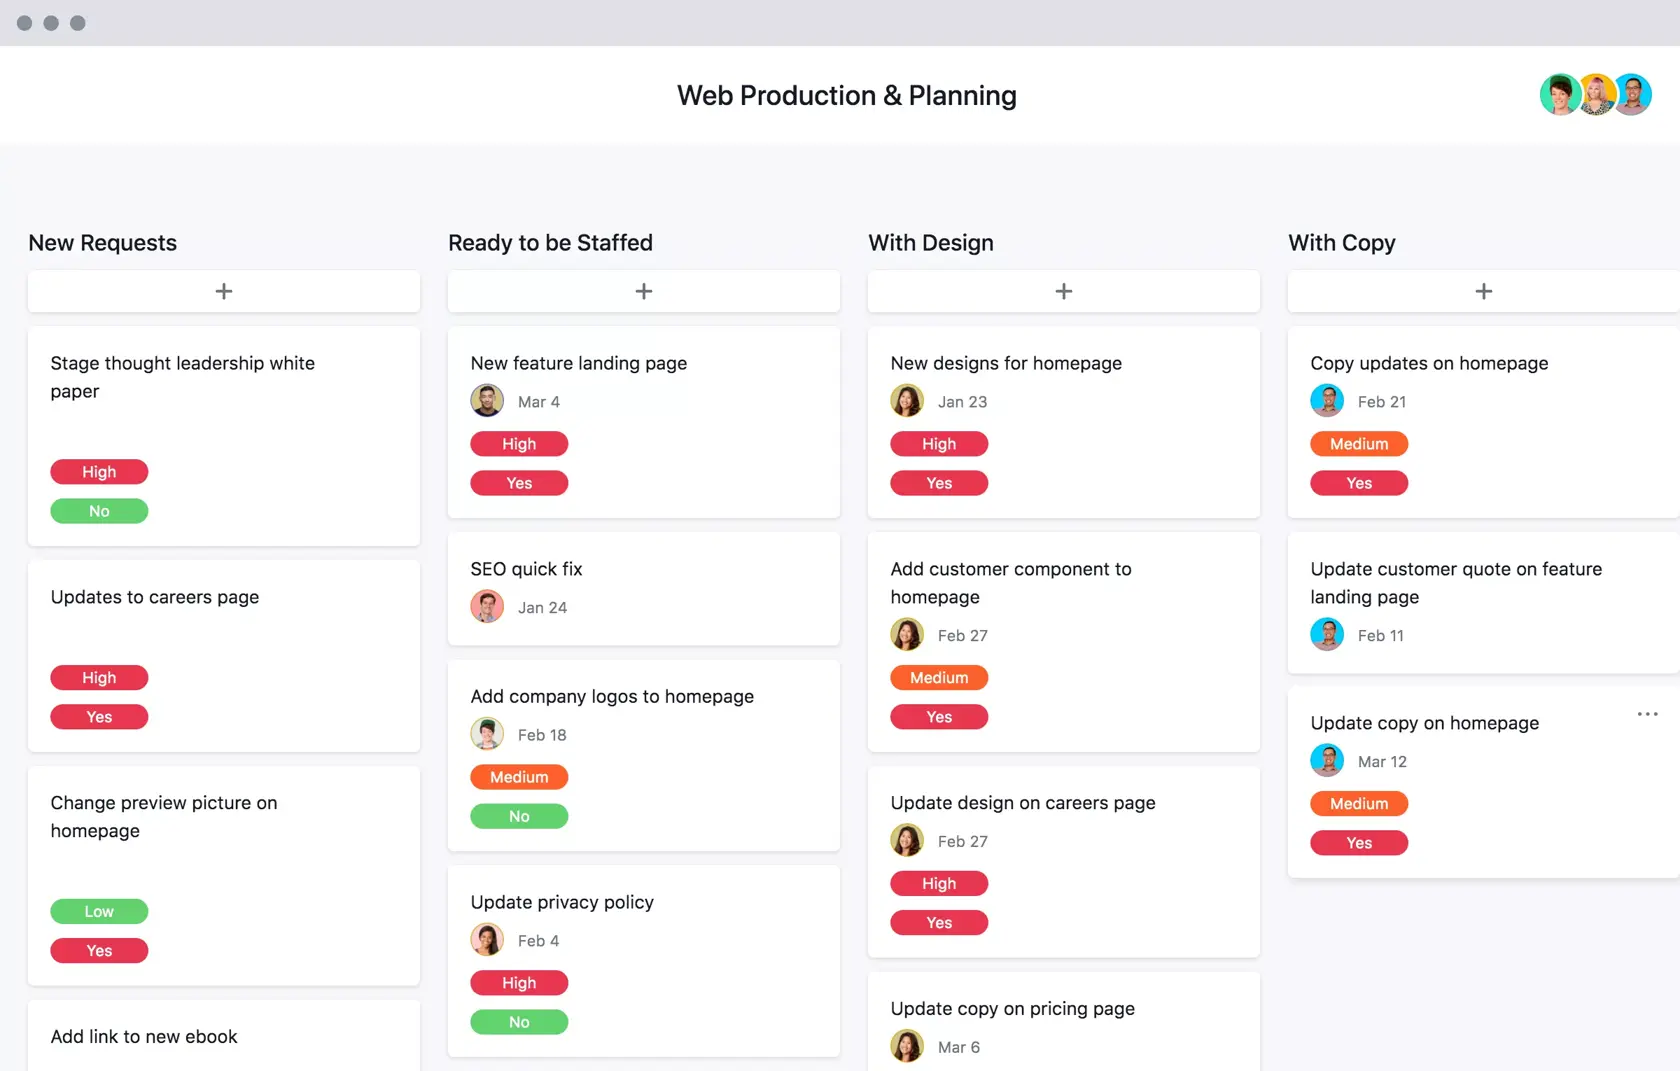 [Old product ui] Web production process template, Kanban style project view in Asana (Boards)